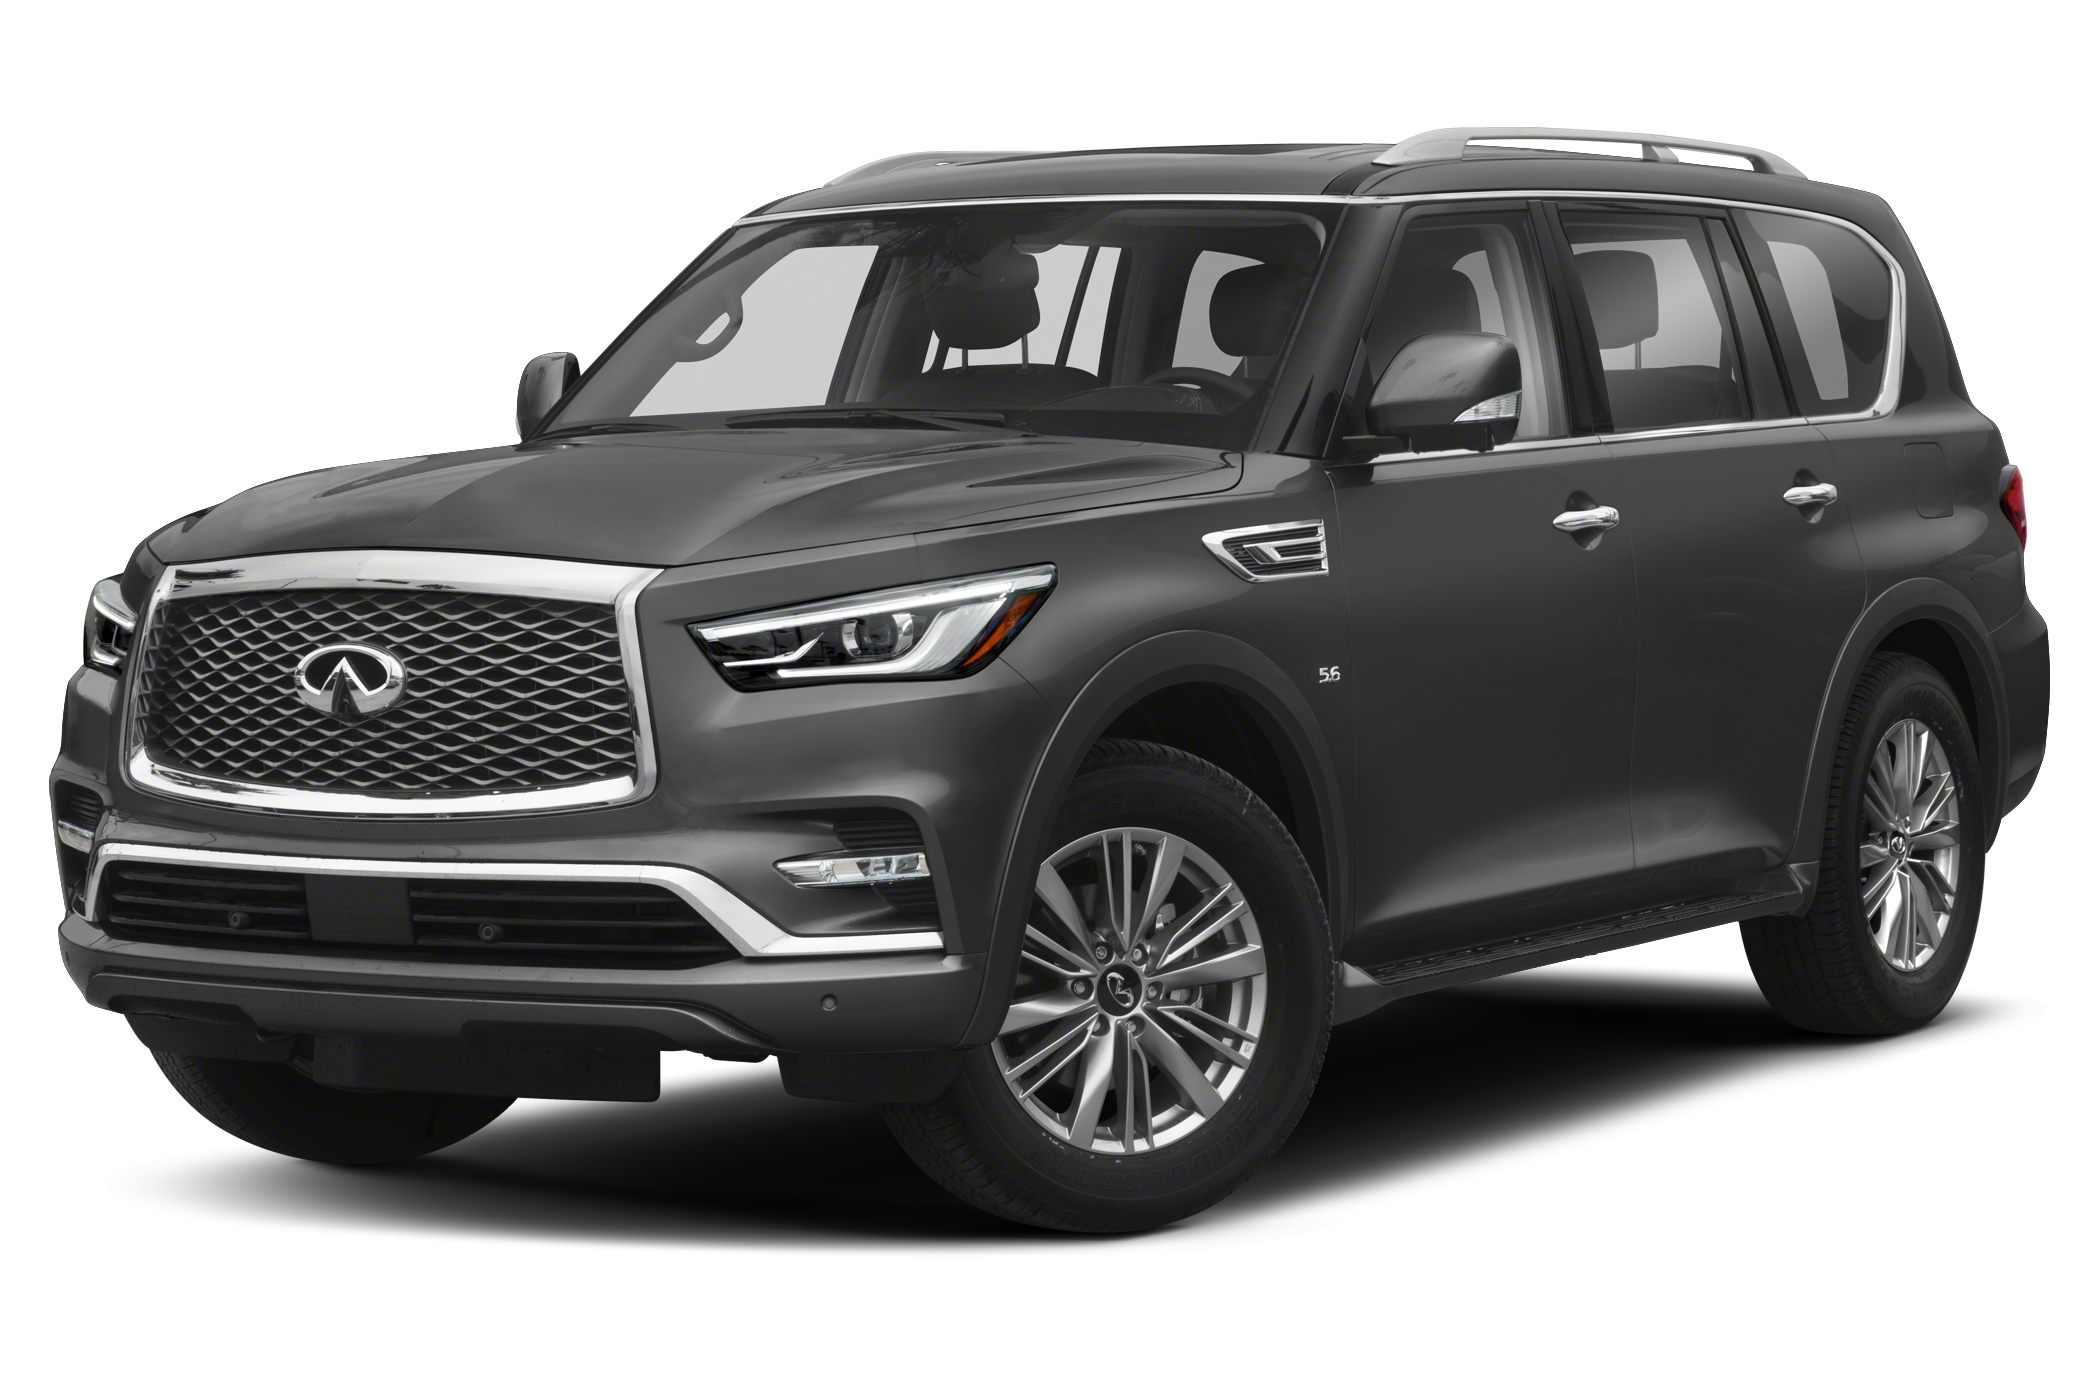 2019 Infiniti Qx80 Limited 4dr All Wheel Drive Pricing And Options